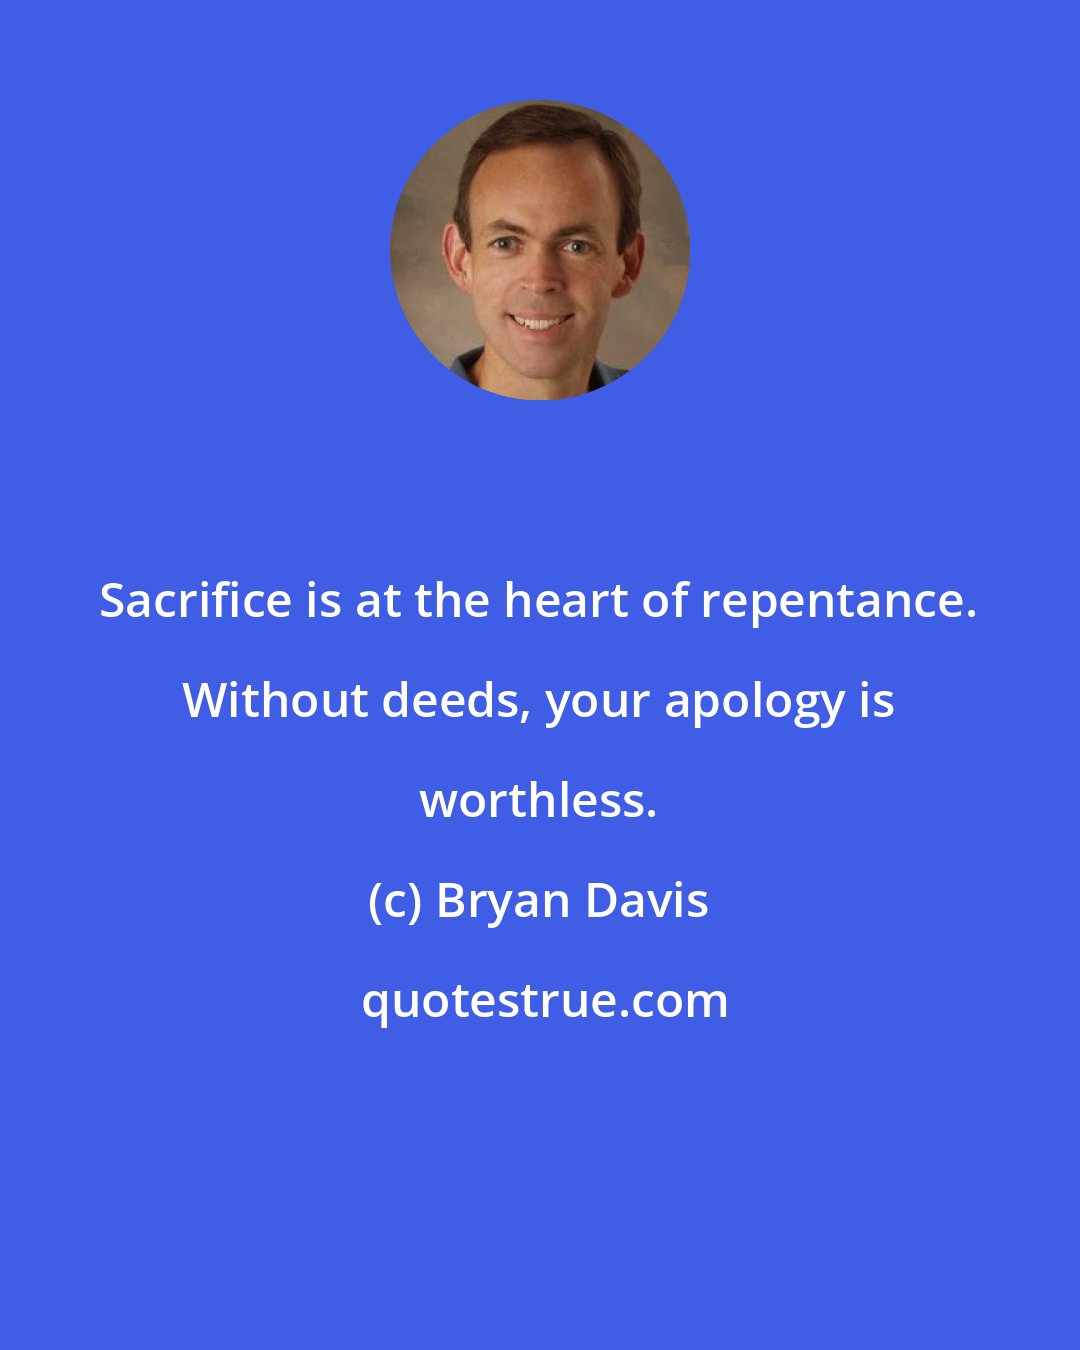 Bryan Davis: Sacrifice is at the heart of repentance. Without deeds, your apology is worthless.